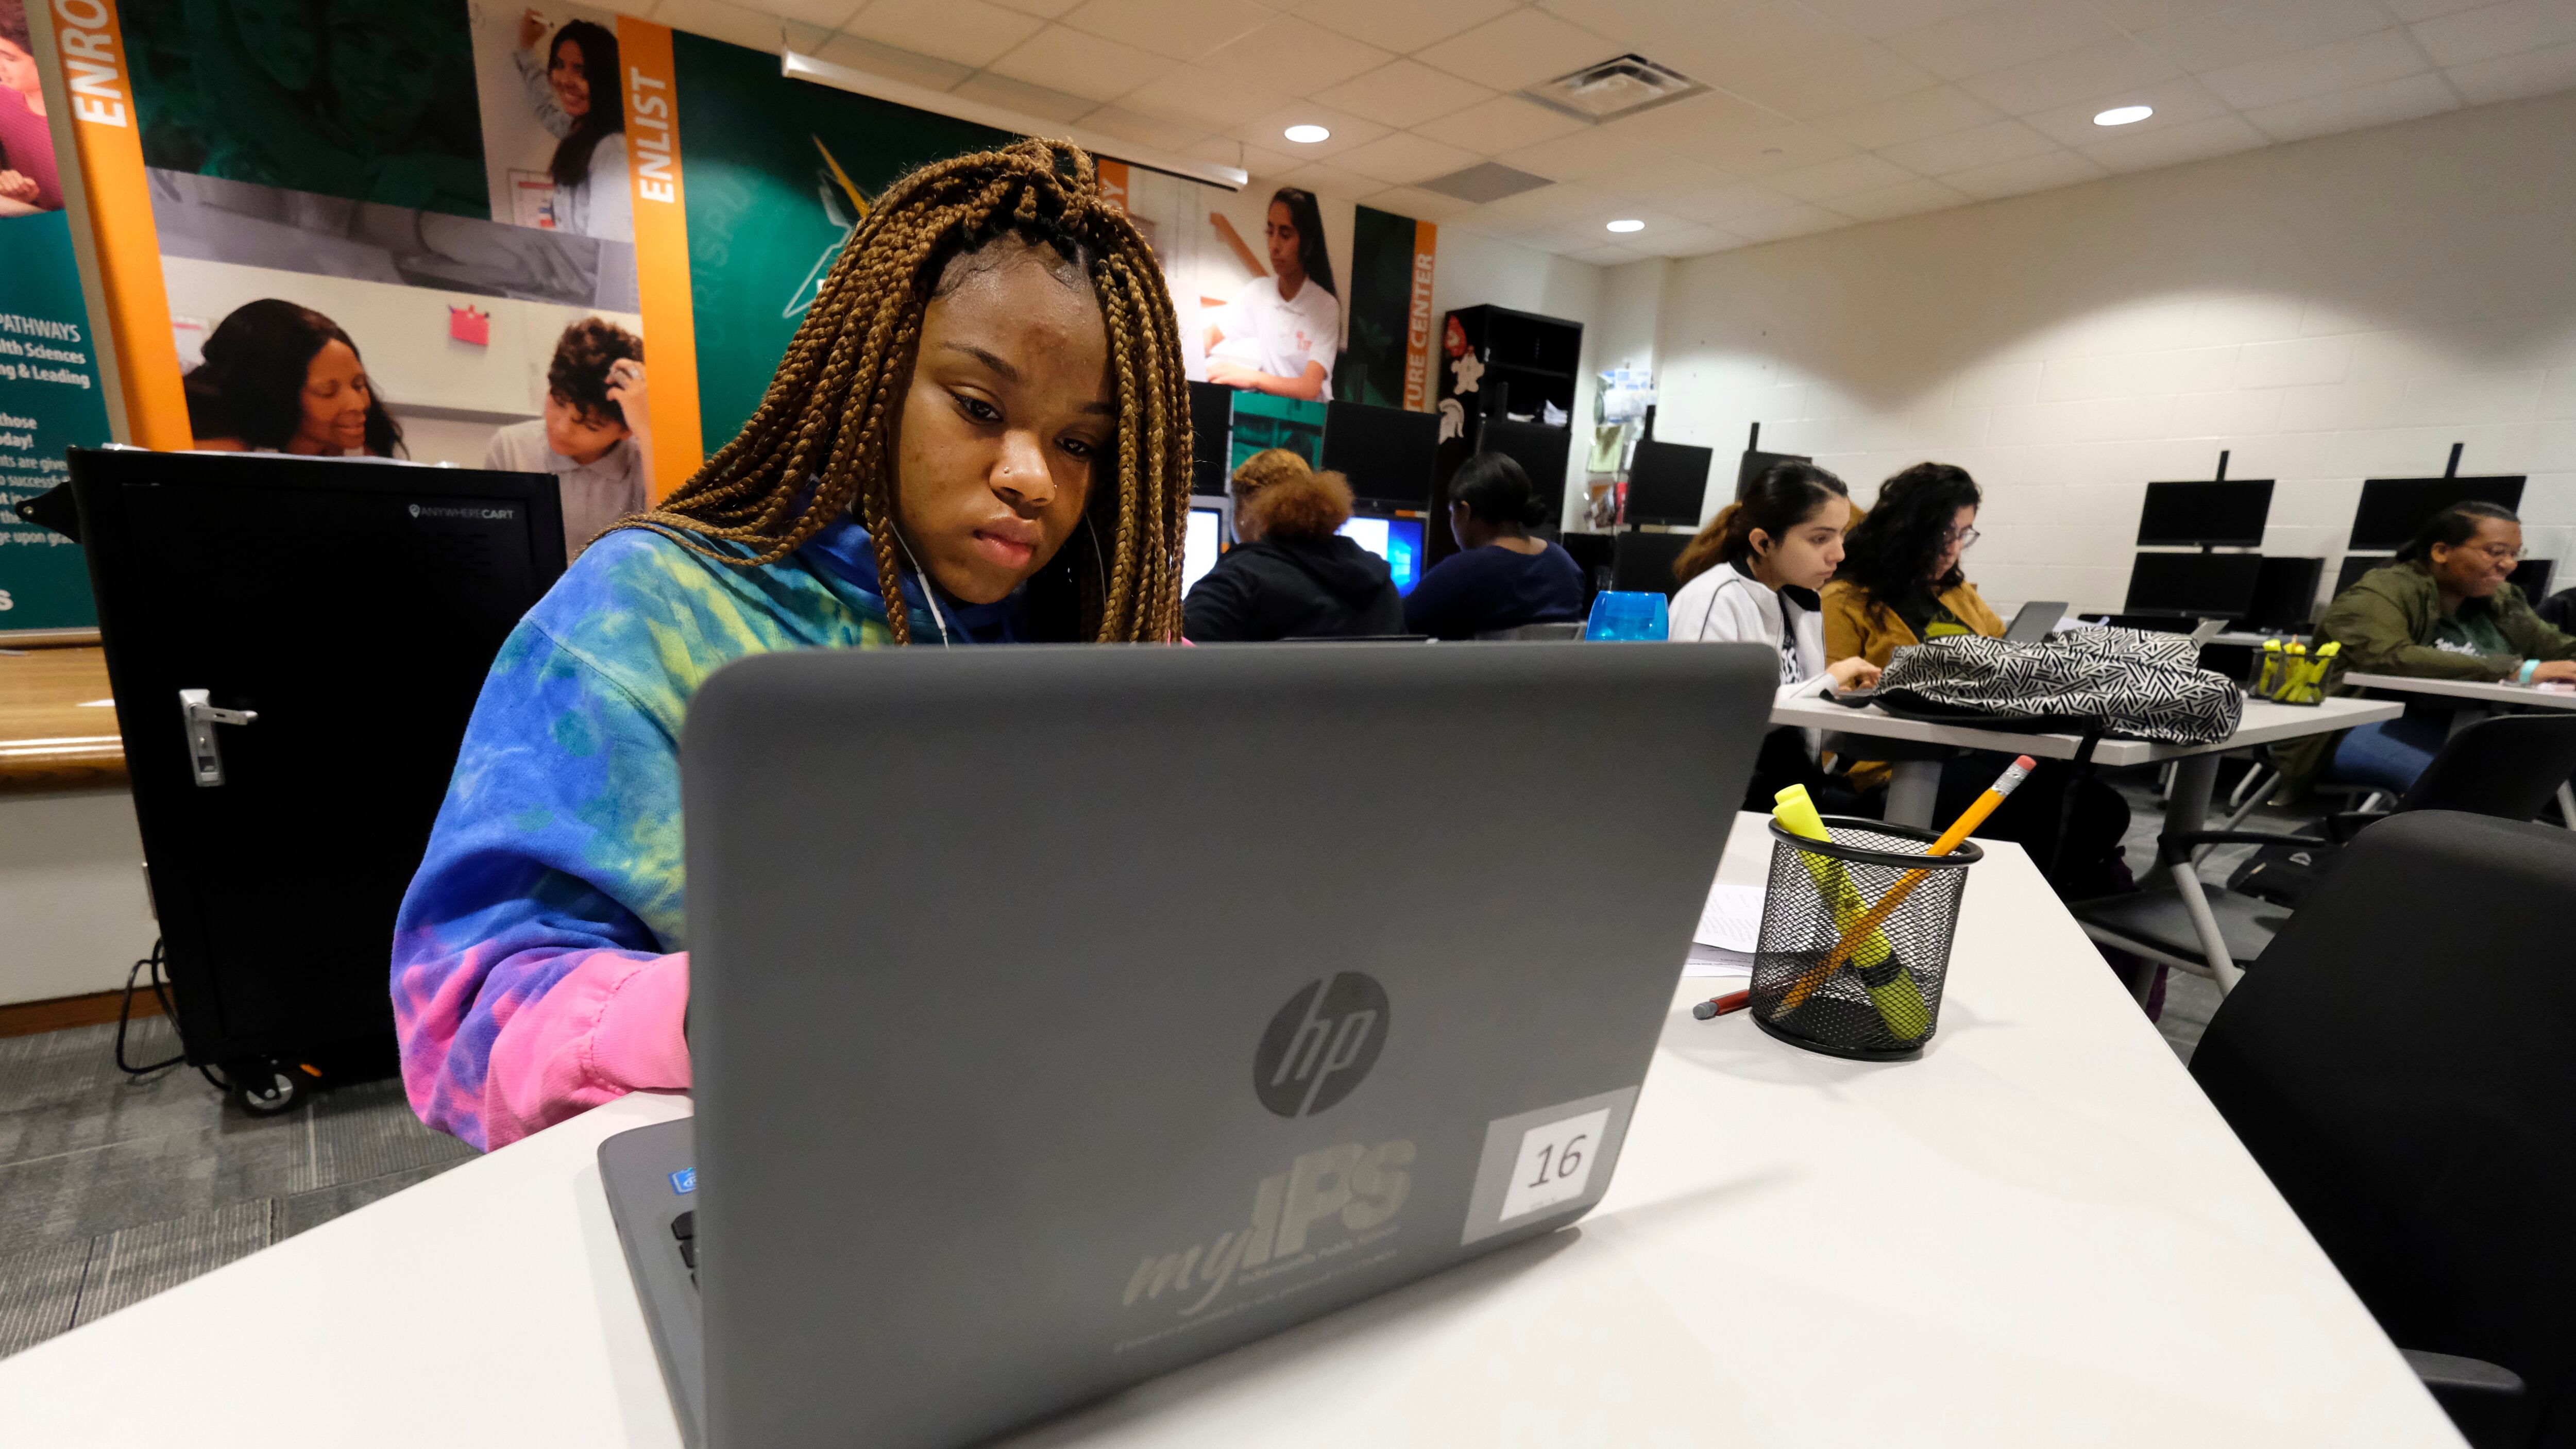 A student works at a laptop computer in a classroom at Crispus Attucks High School, a public school in Indianapolis, Indiana.